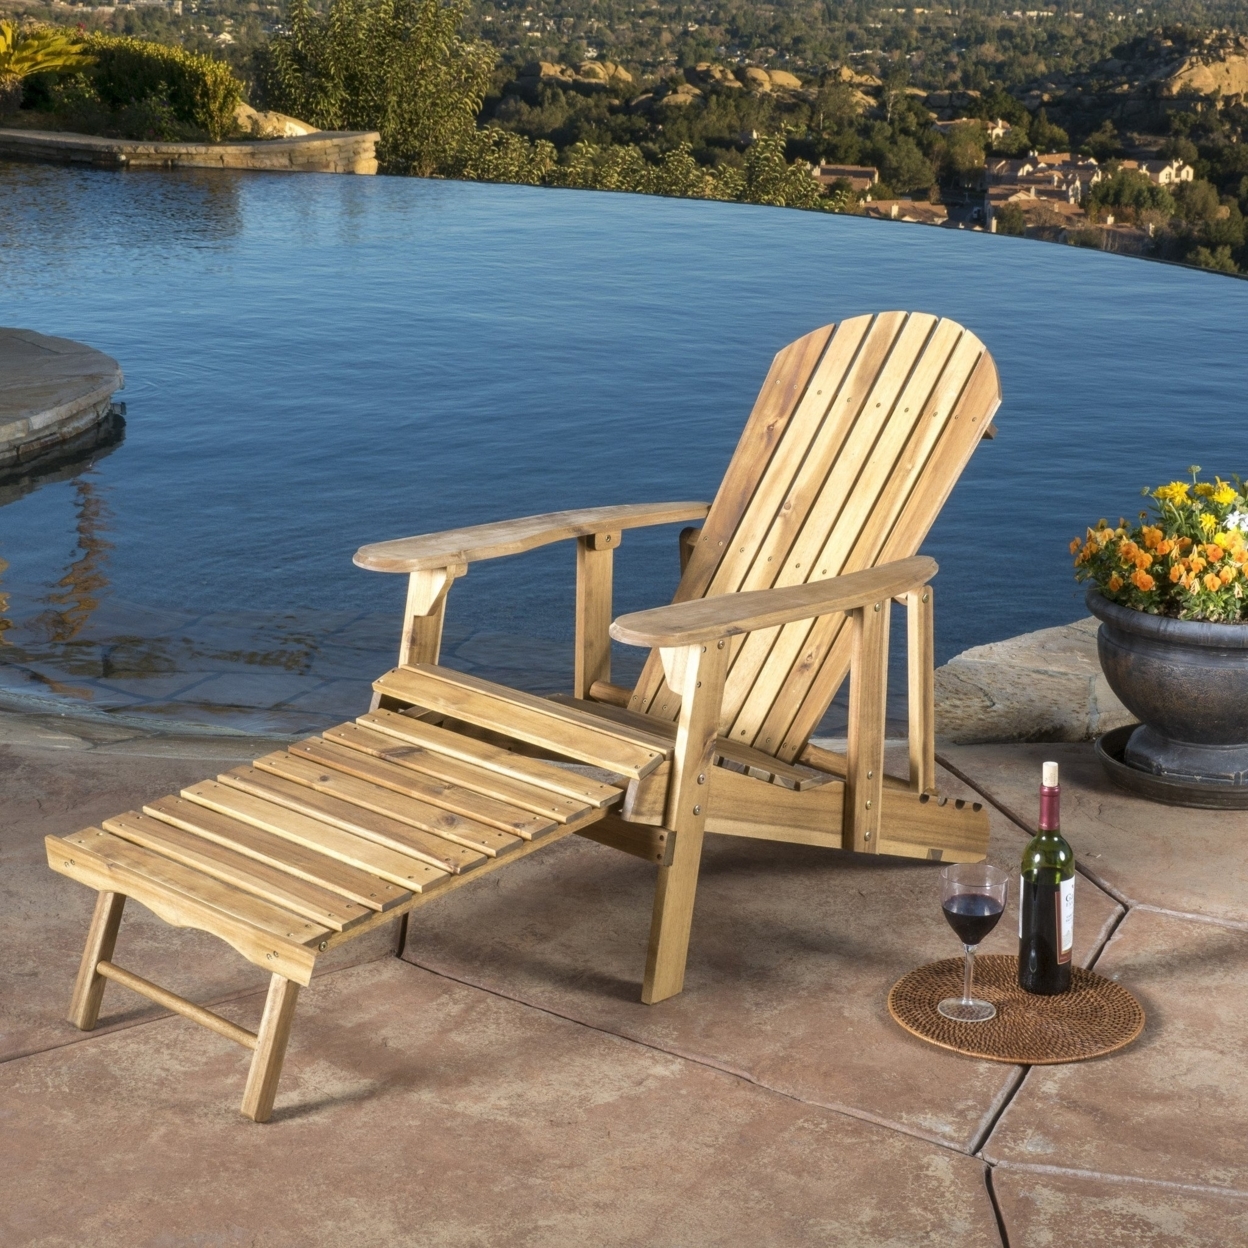 Buy Katherine Outdoor Reclining Wood Adirondack Chair with Footrest by